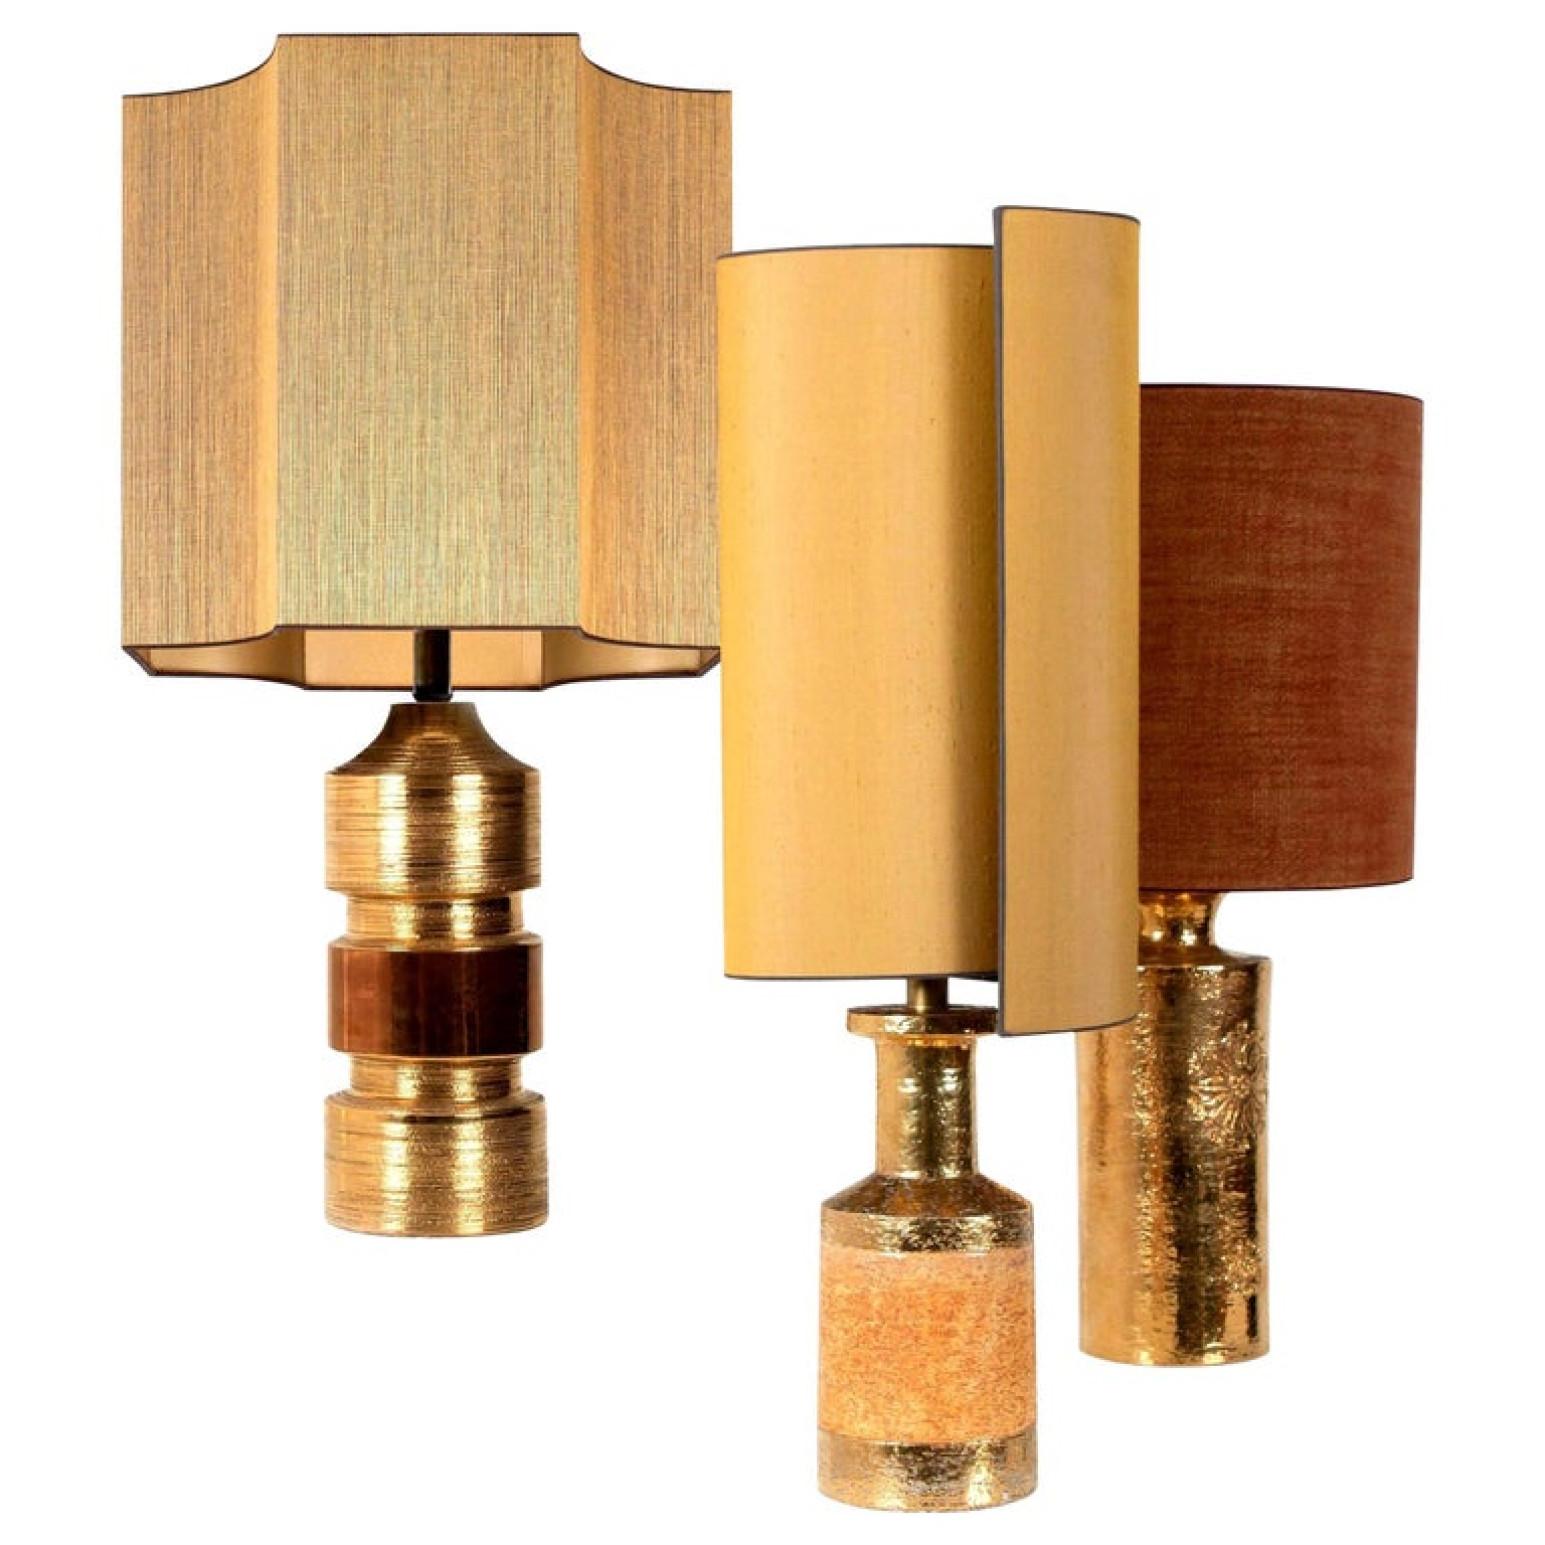 Exceptional set Bitossi lamps with a ceramic base with shiny metallic gold glaze. Bitossi for Bergboms, Italy, circa 1960s. With an exceptional custom made shades by René Houben. With warm gold inner-shade.

Approximate dimensions:
Lamp ceramic only